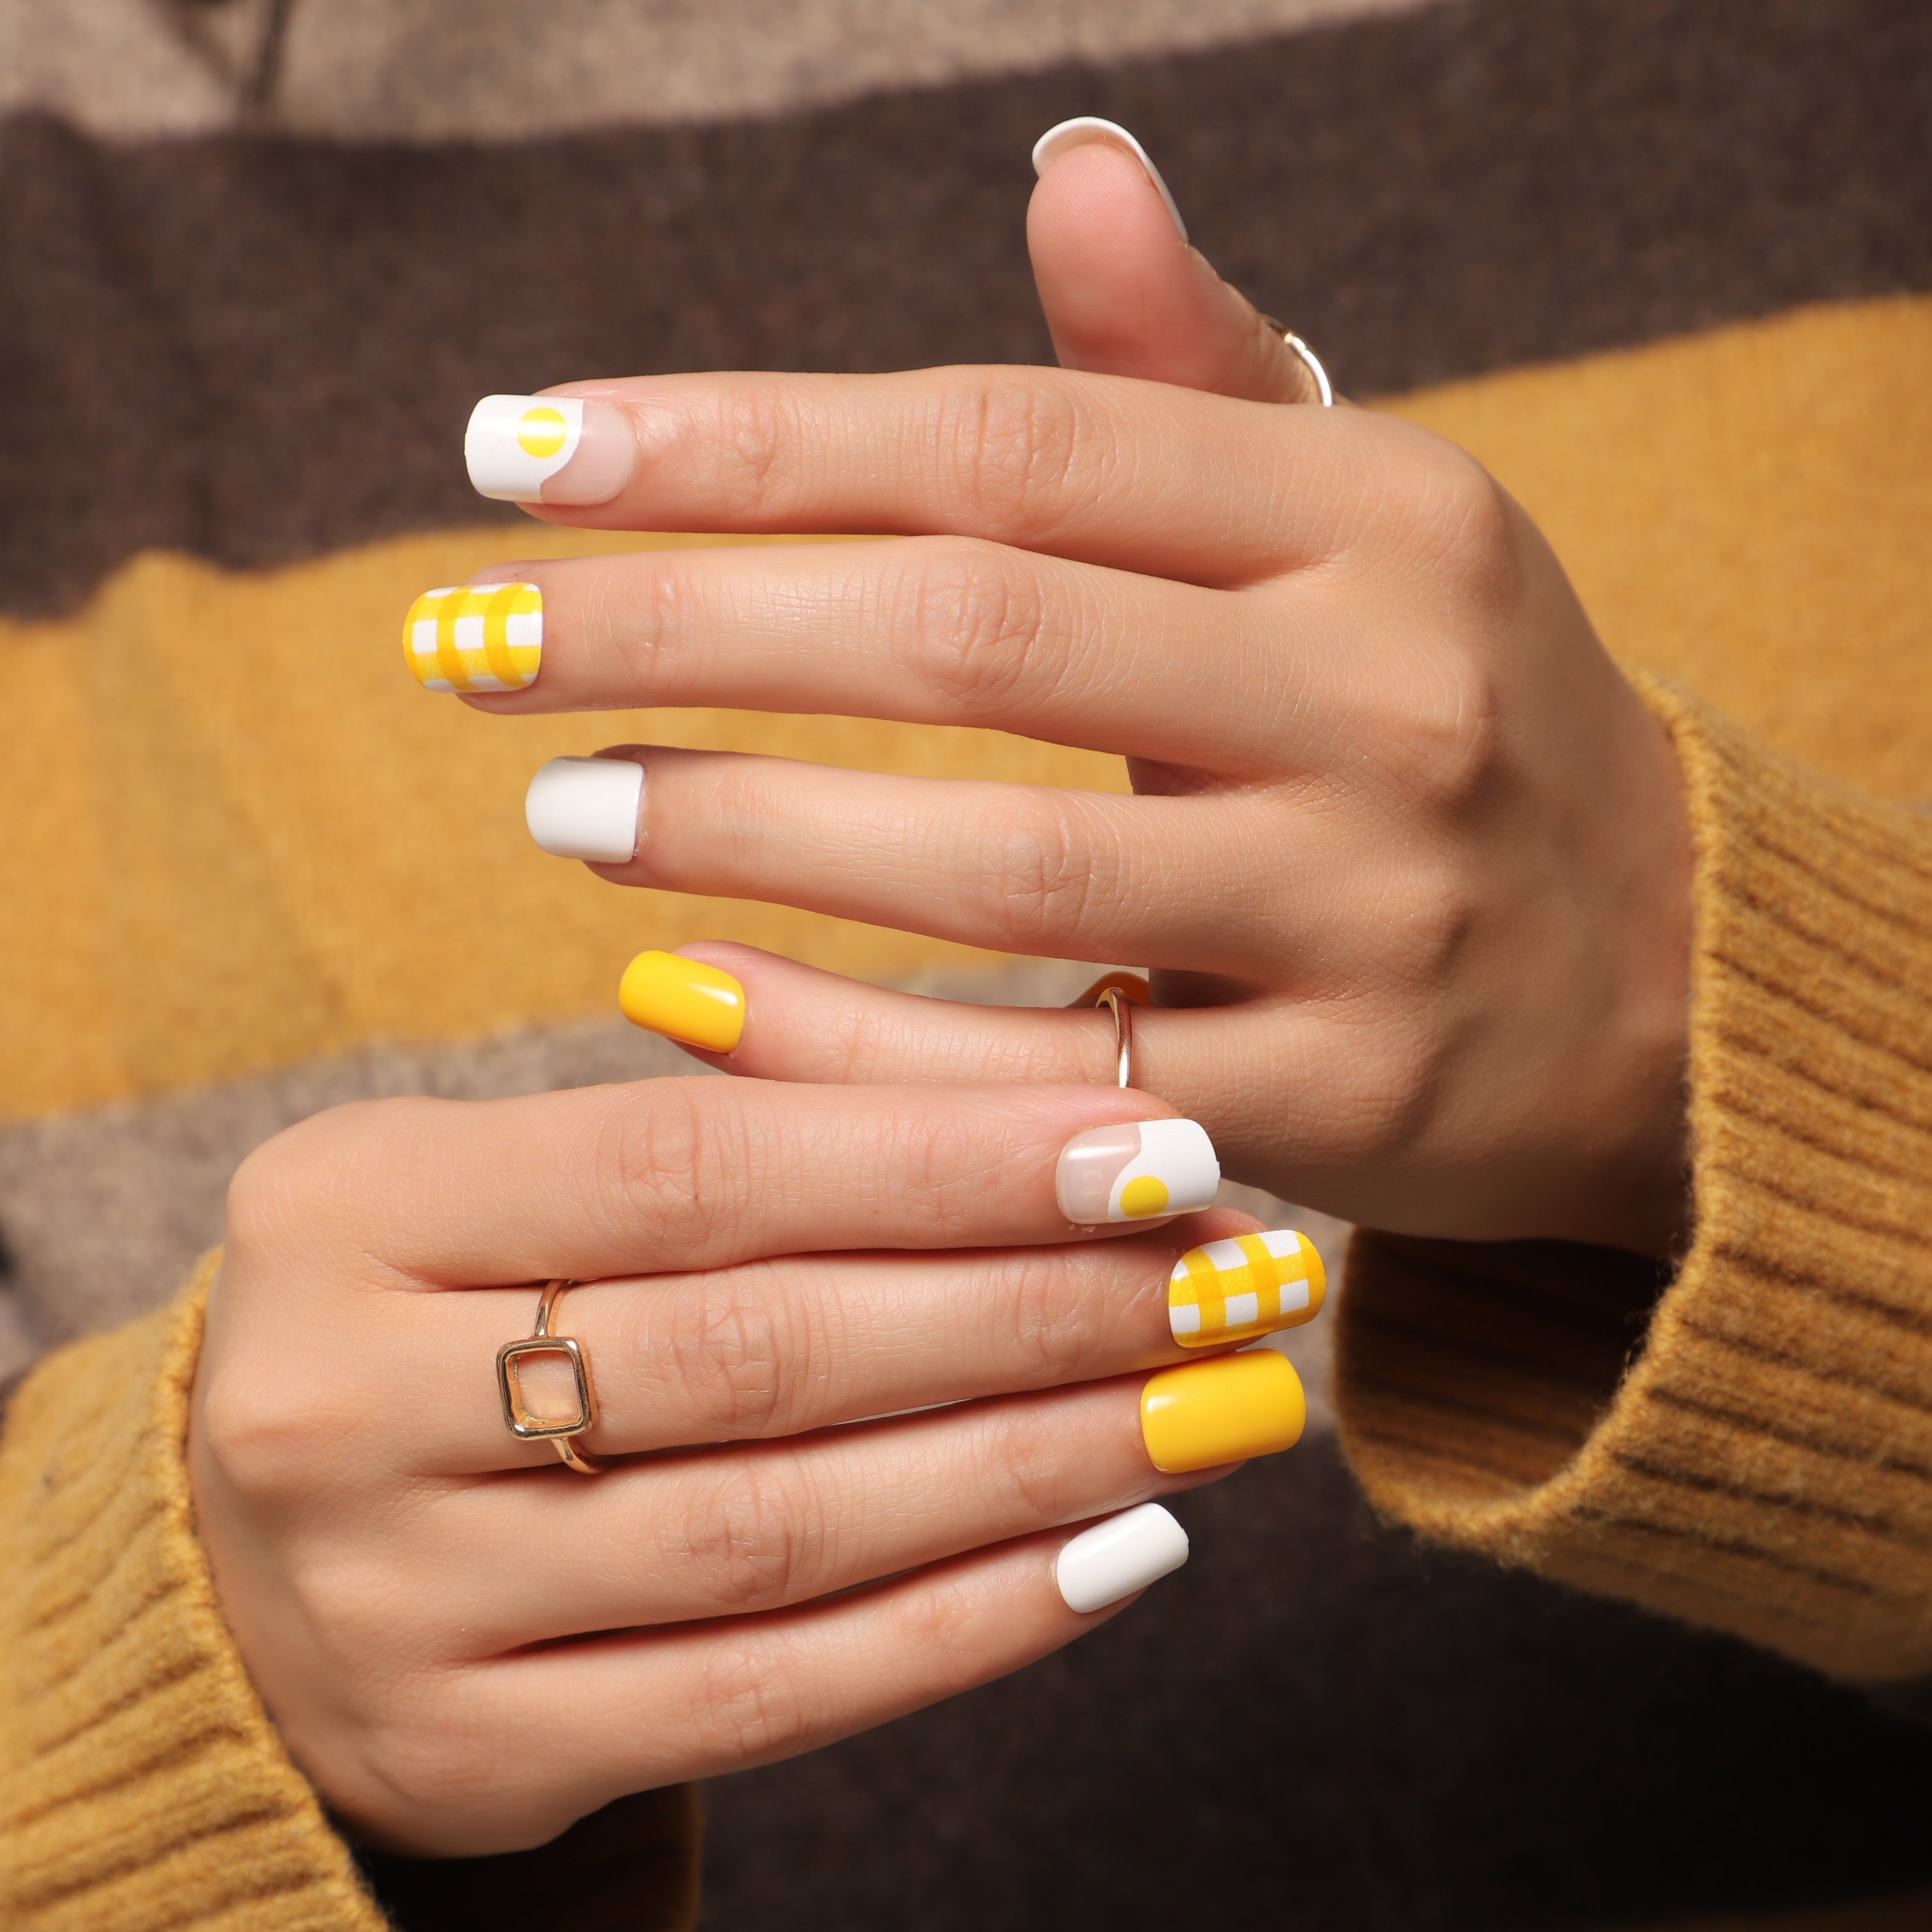 Neon Nails Are The Spring Fling That's Manifesting Sunshine | Glamour UK